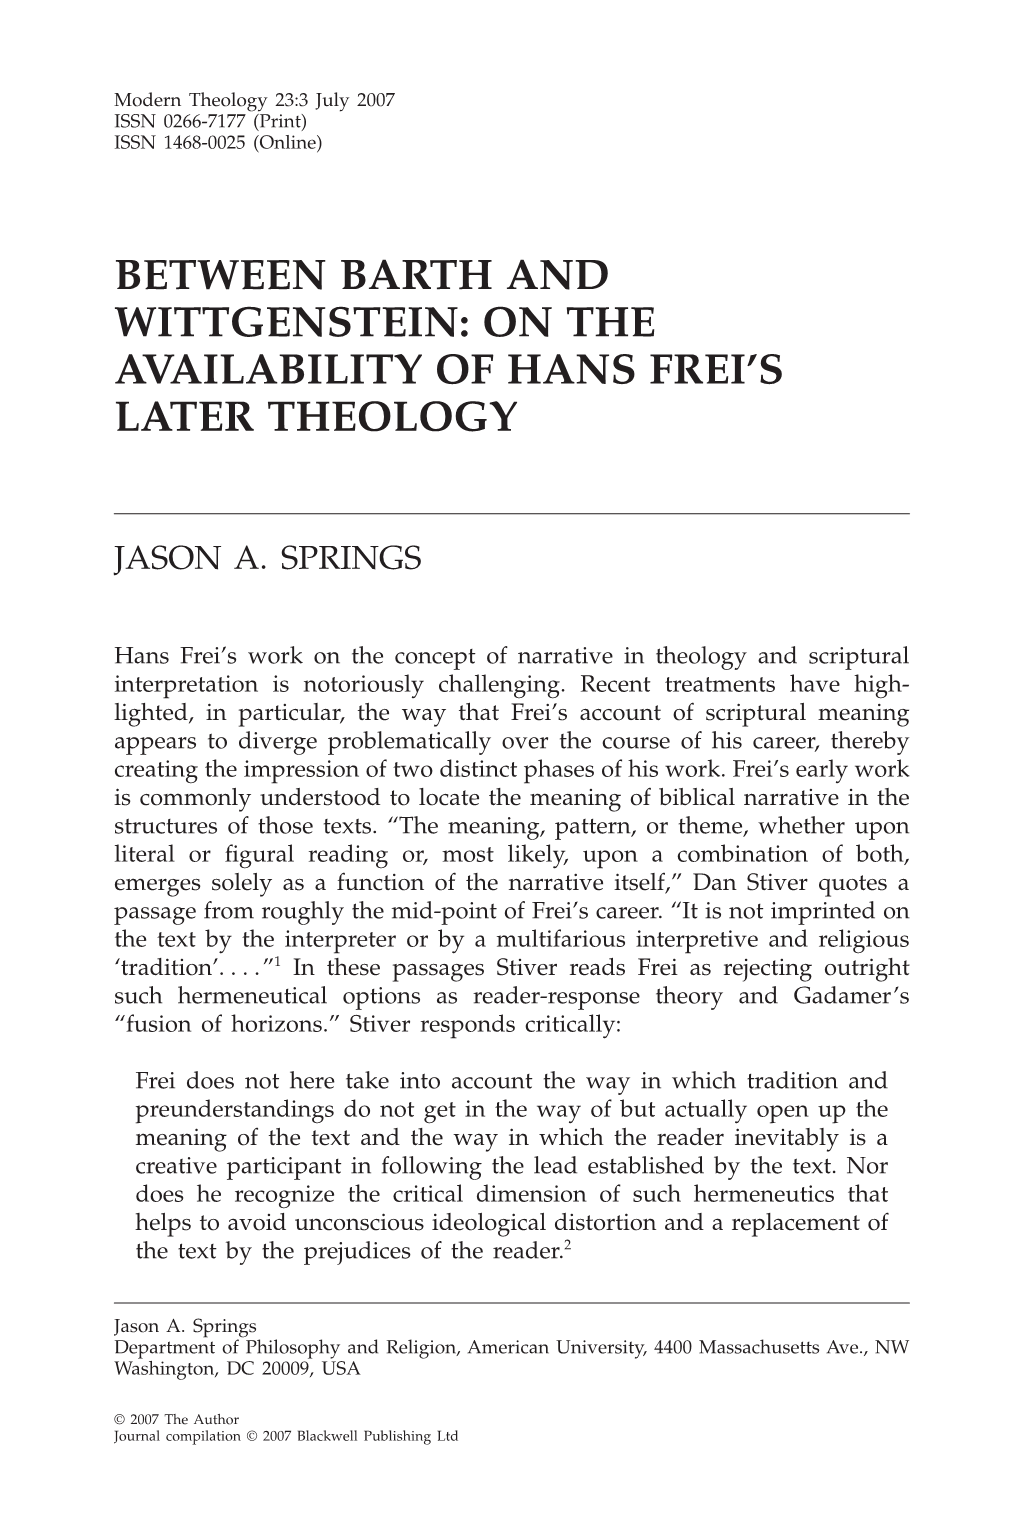 Between Barth and Wittgenstein: on the Availability of Hans Frei’S Later Theology